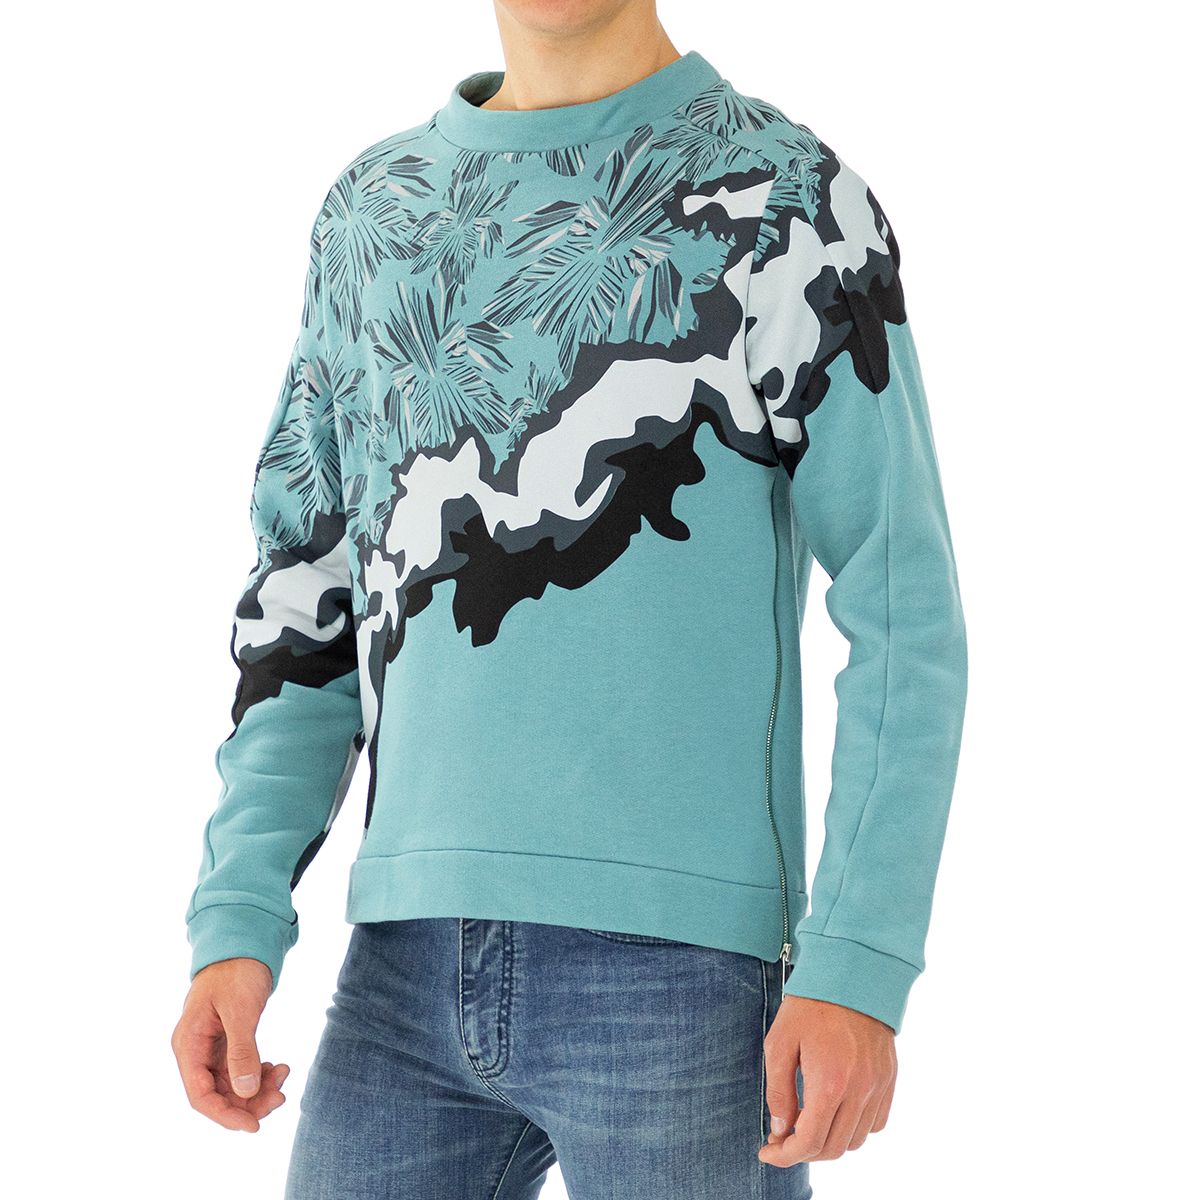 Emporio Armani 6Z1M6U1J3CZ-F530-XL The print of this sweatshirt will add an extra touch to your sporty-casual look.